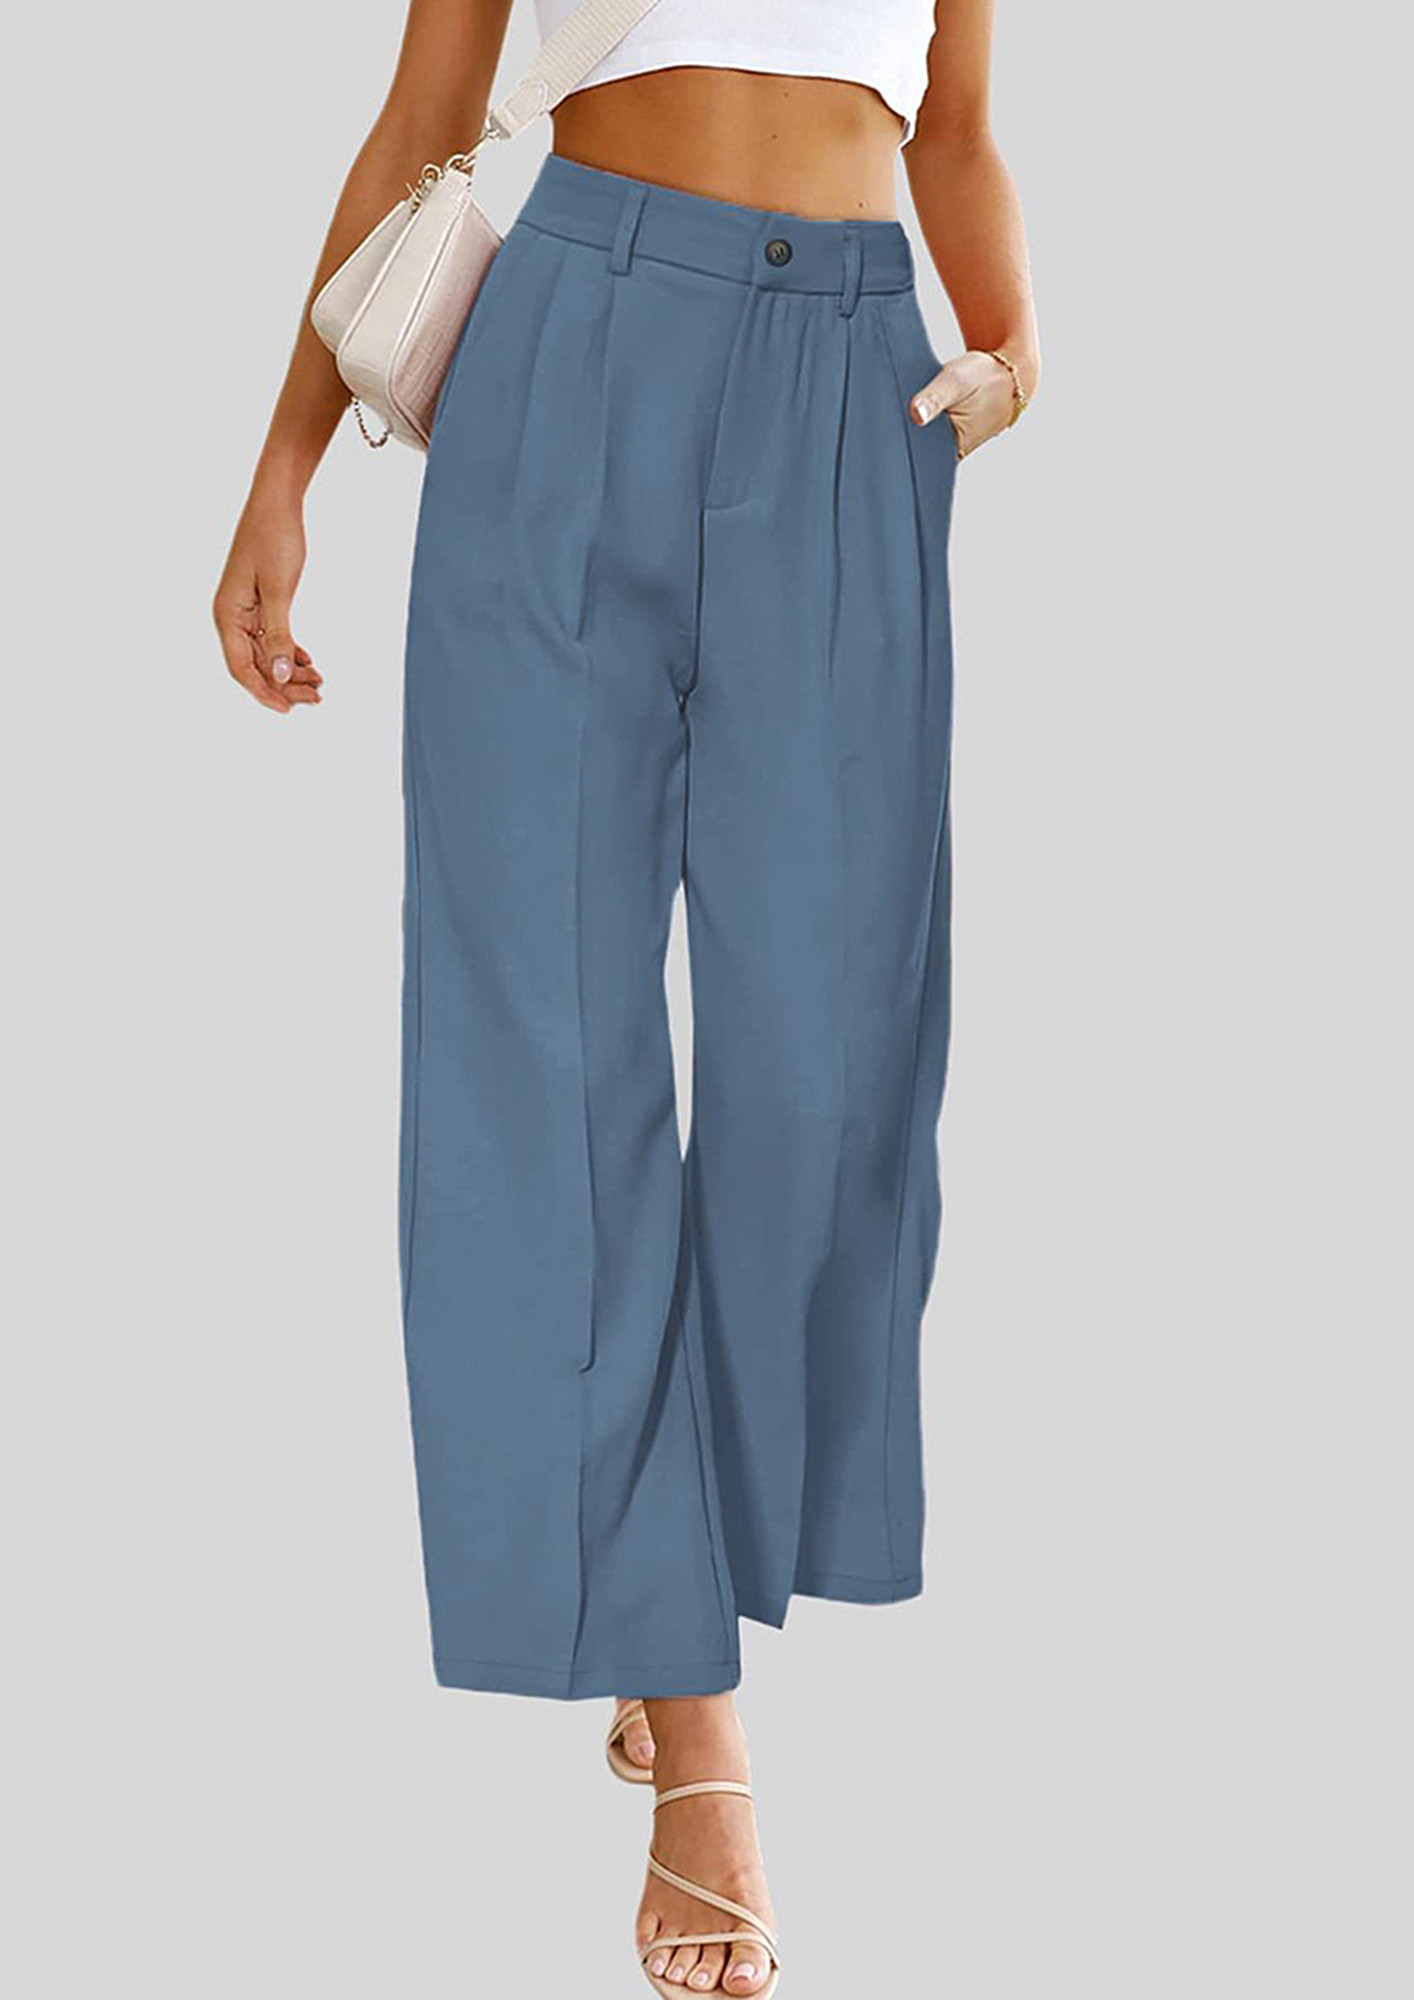 Ginger by Lifestyle Sky Blue Cotton Pants